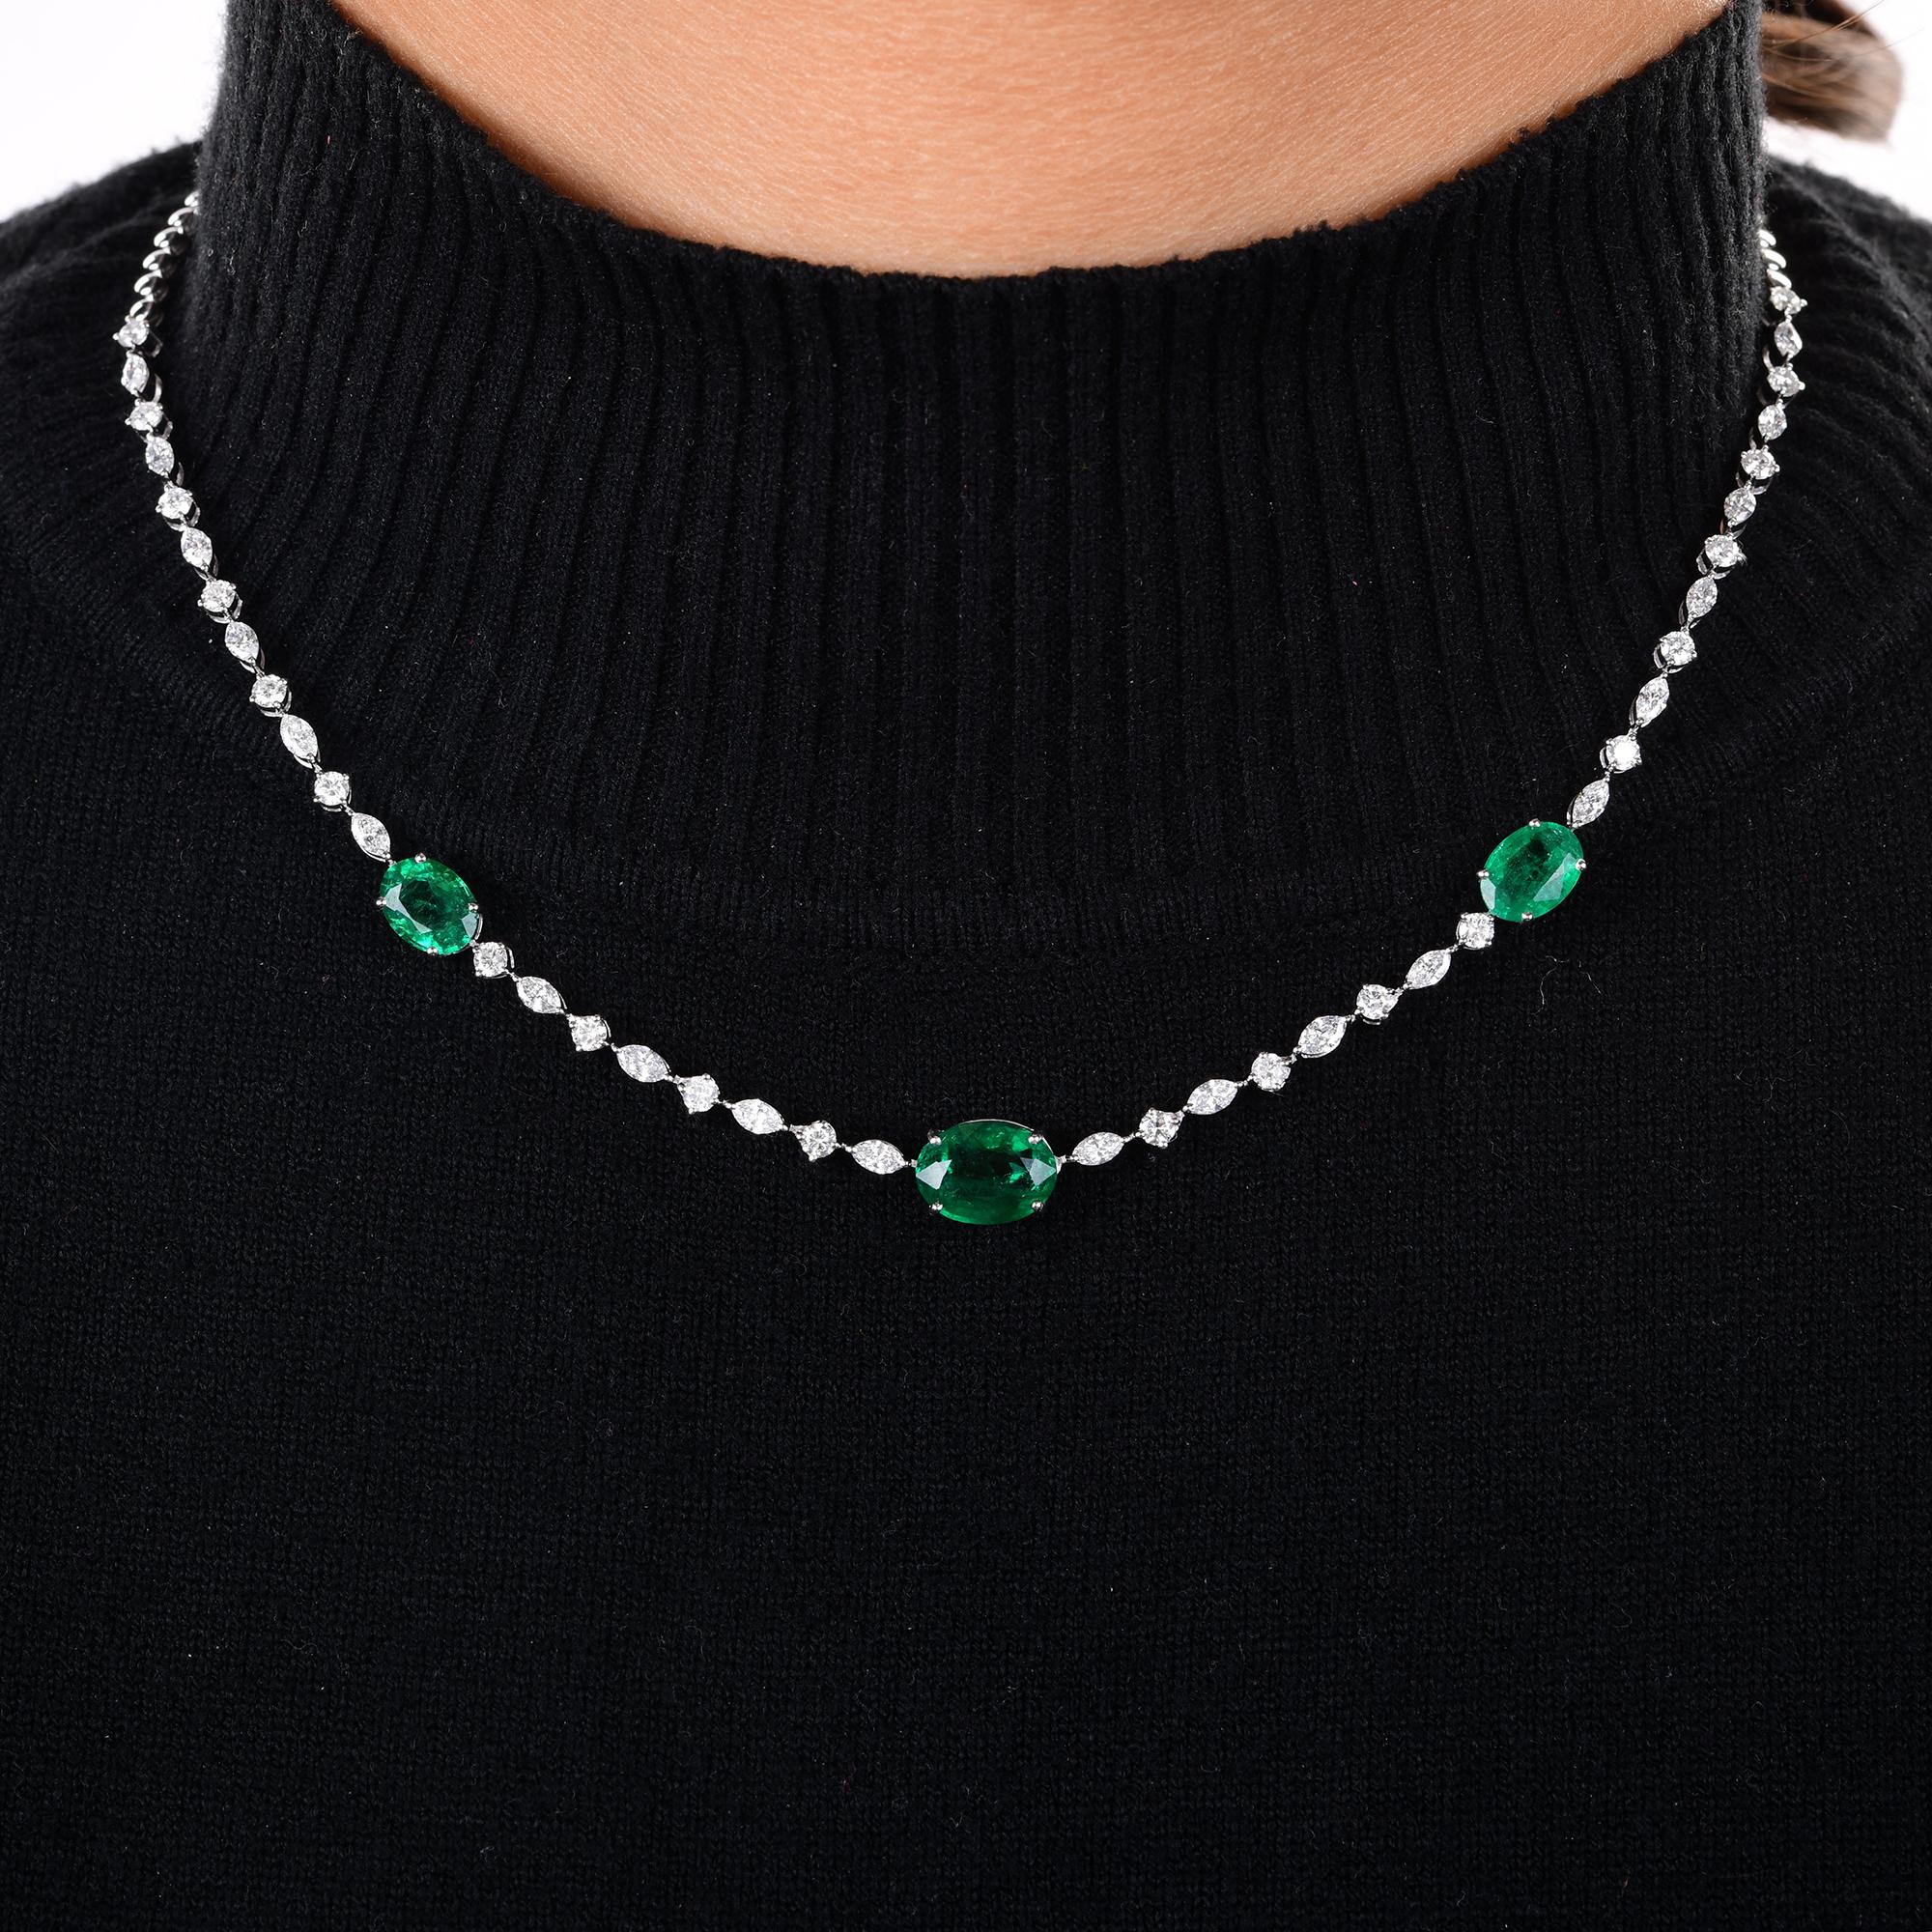 A necklace featuring an oval Zambian emerald gemstone and diamonds in 18 karat white gold is a breathtaking and elegant piece of fine jewelry. The necklace typically showcases an oval-shaped Zambian emerald as the centerpiece.

Item Code :-